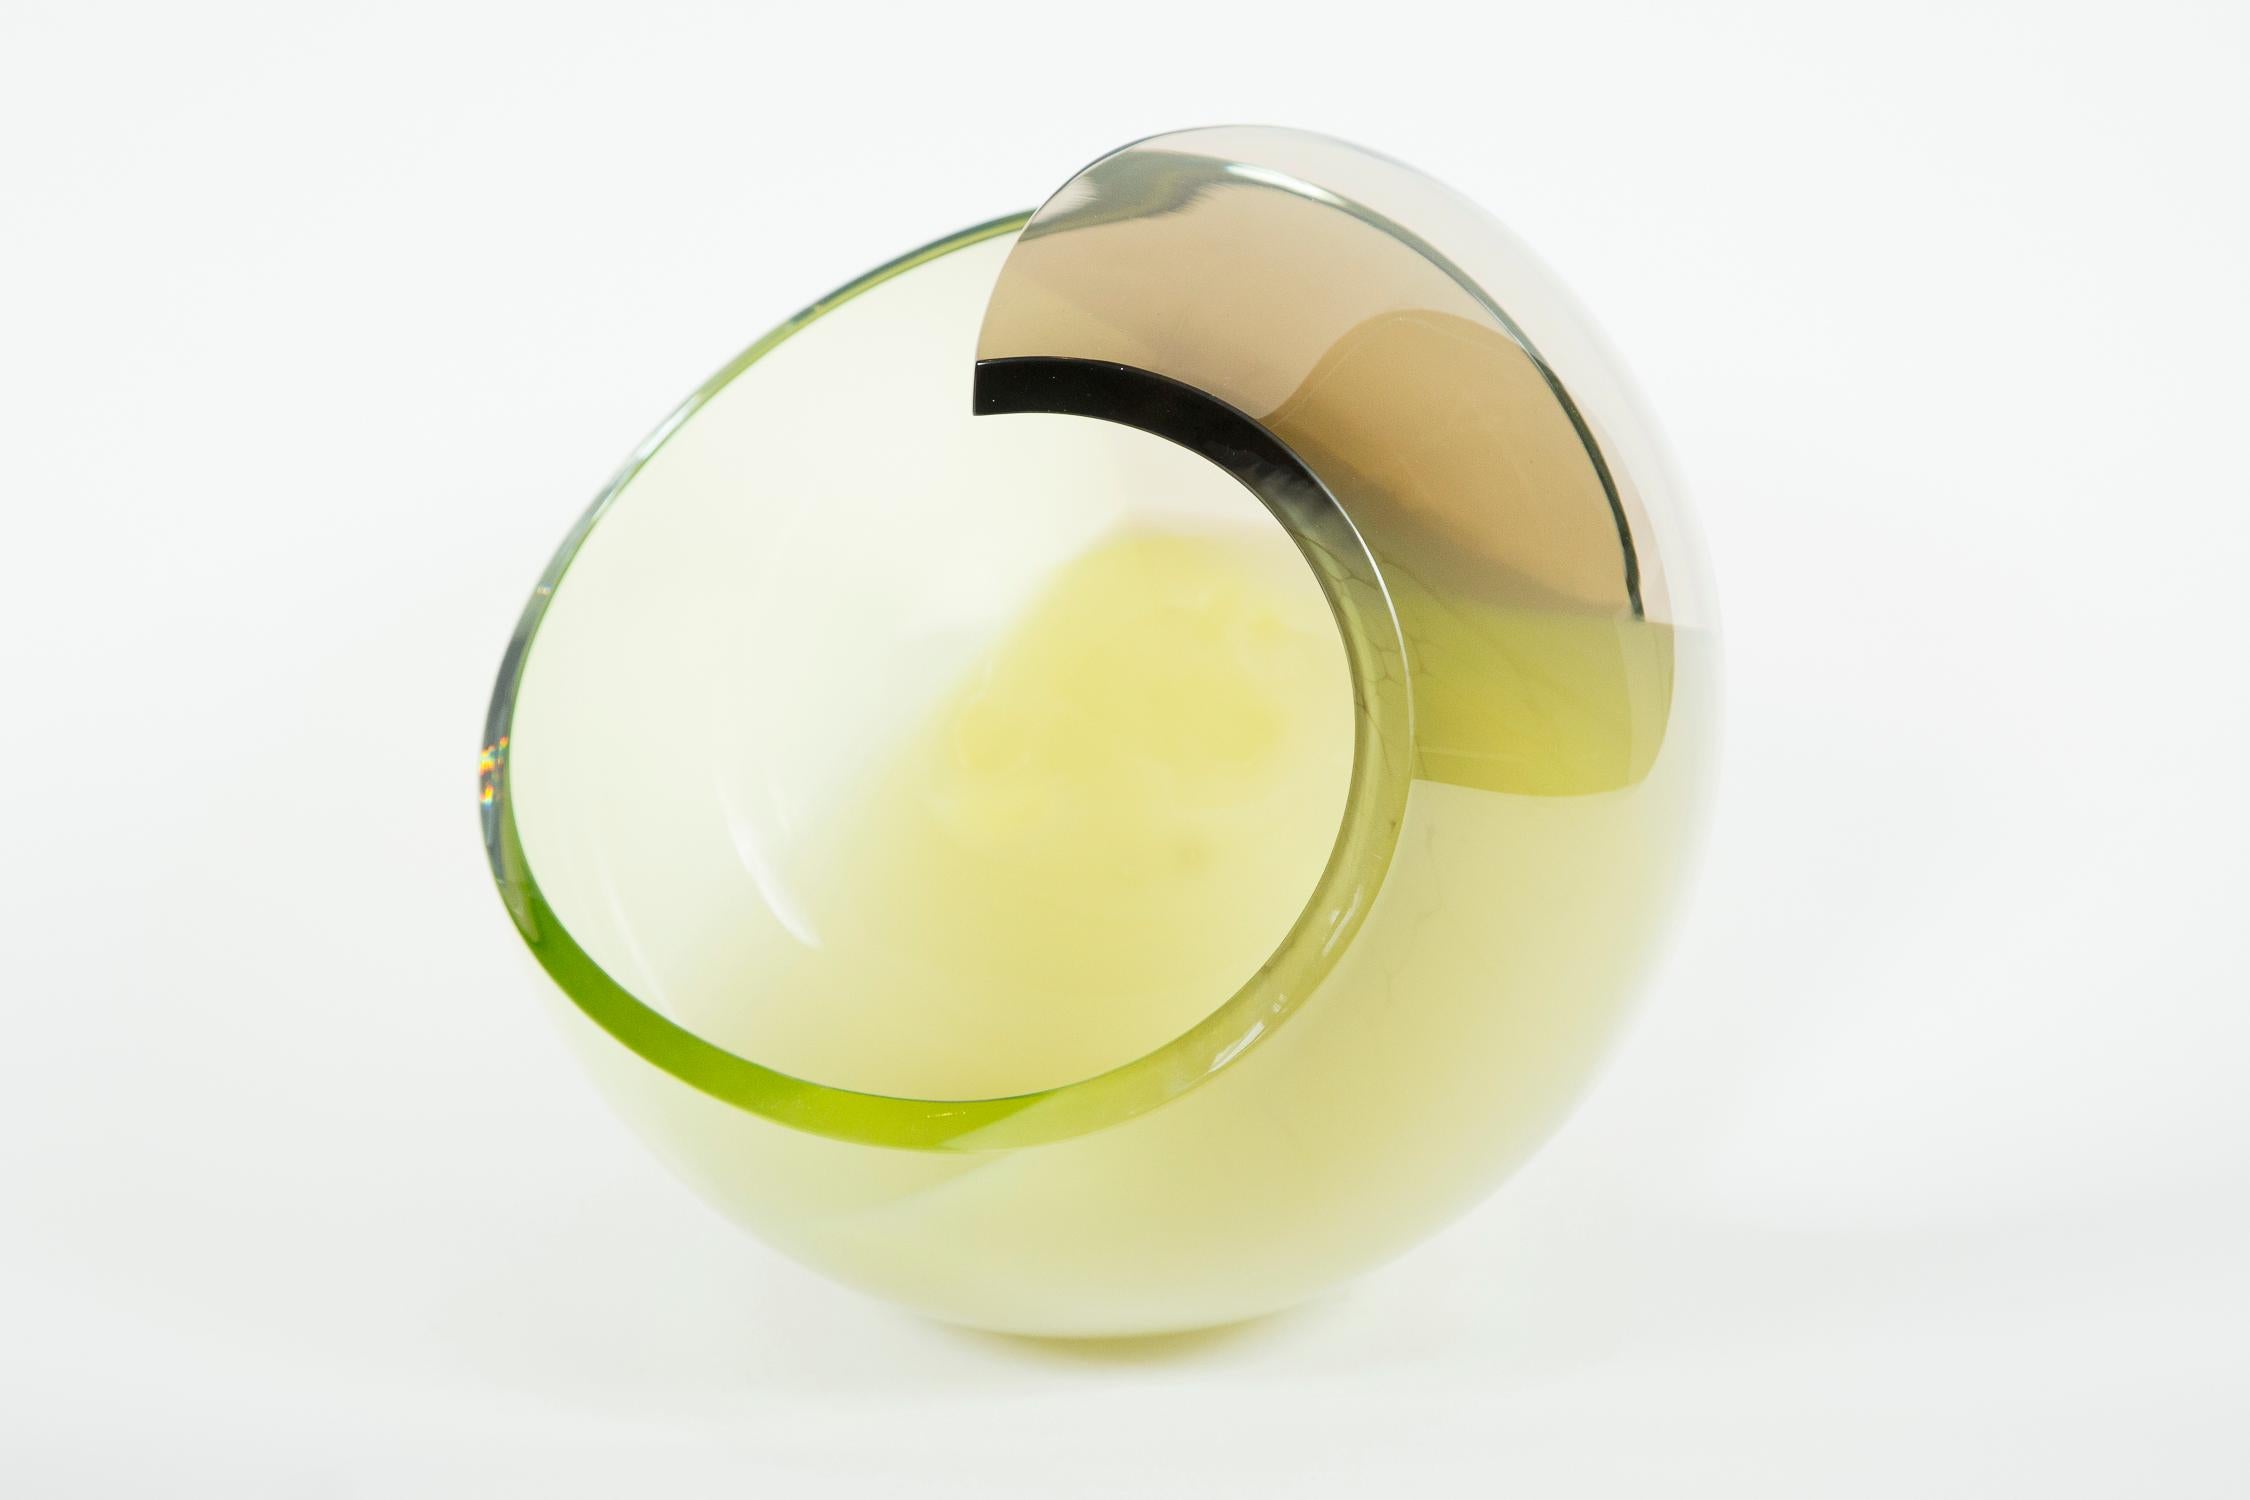 Swedish Planet in Soft Green and Brown Glass Sculpture and Centrepiece by Lena Bergstrom